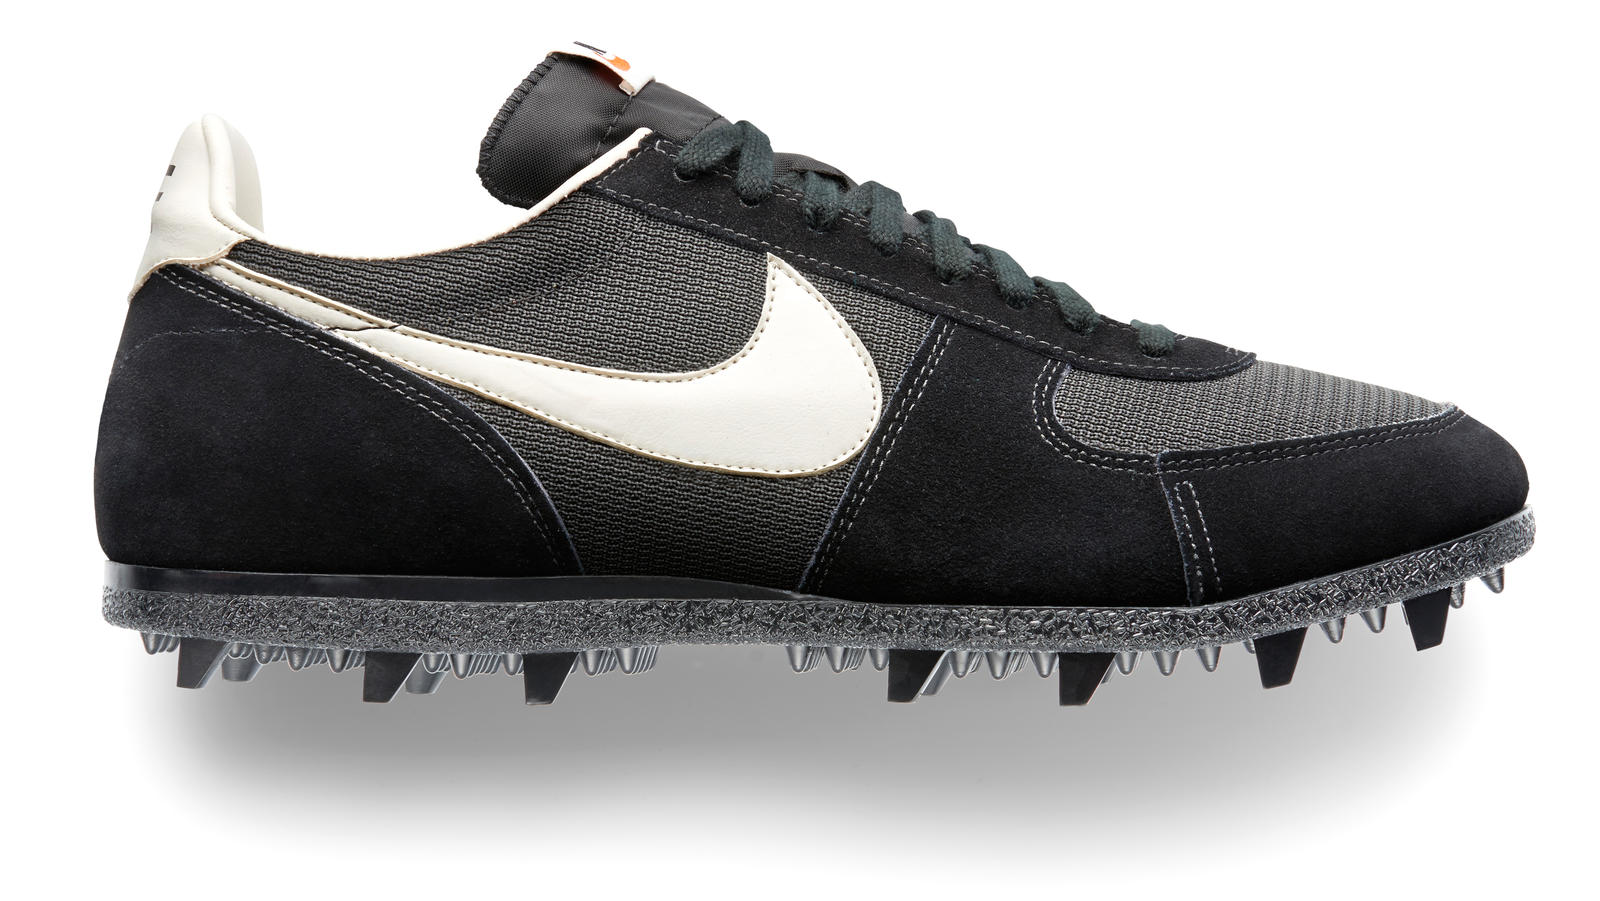 Nike Football Illustrated A Timeline Of Game Changing Innovations